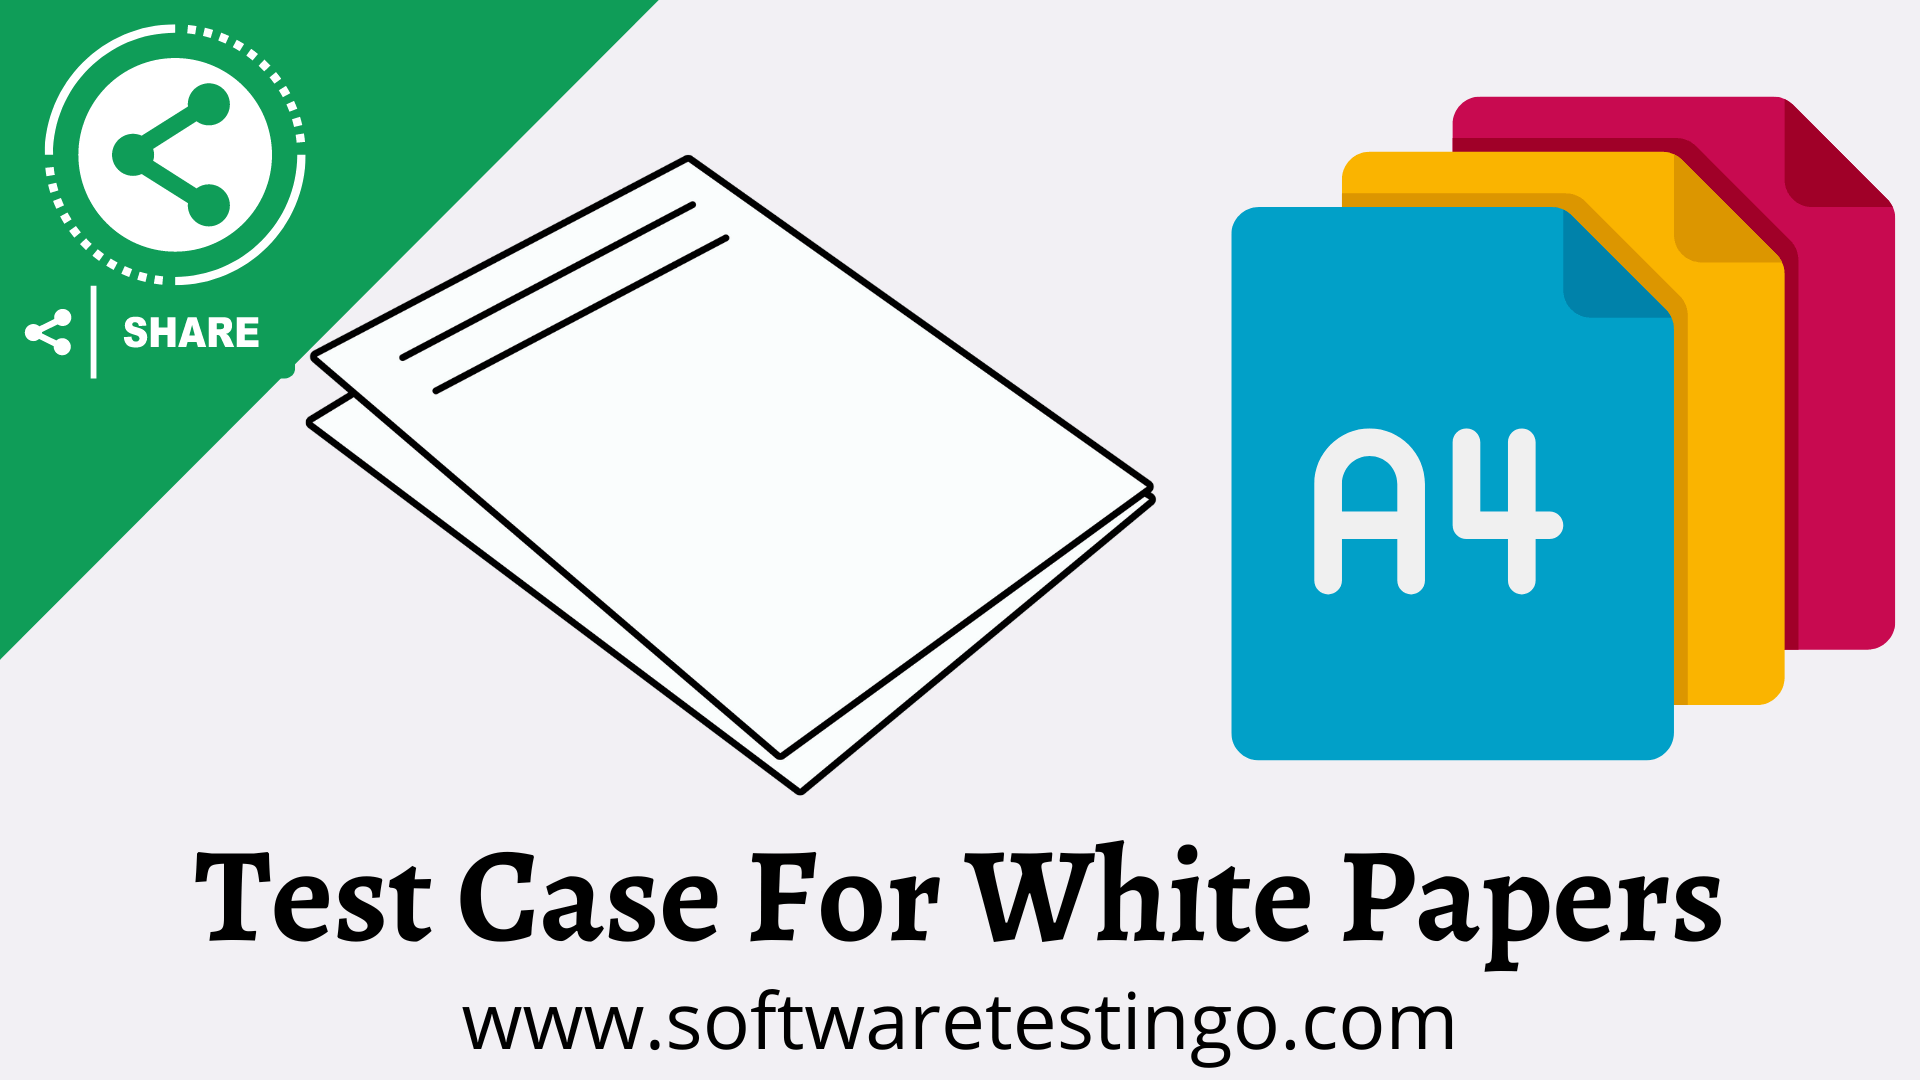 Test Case For White Papers